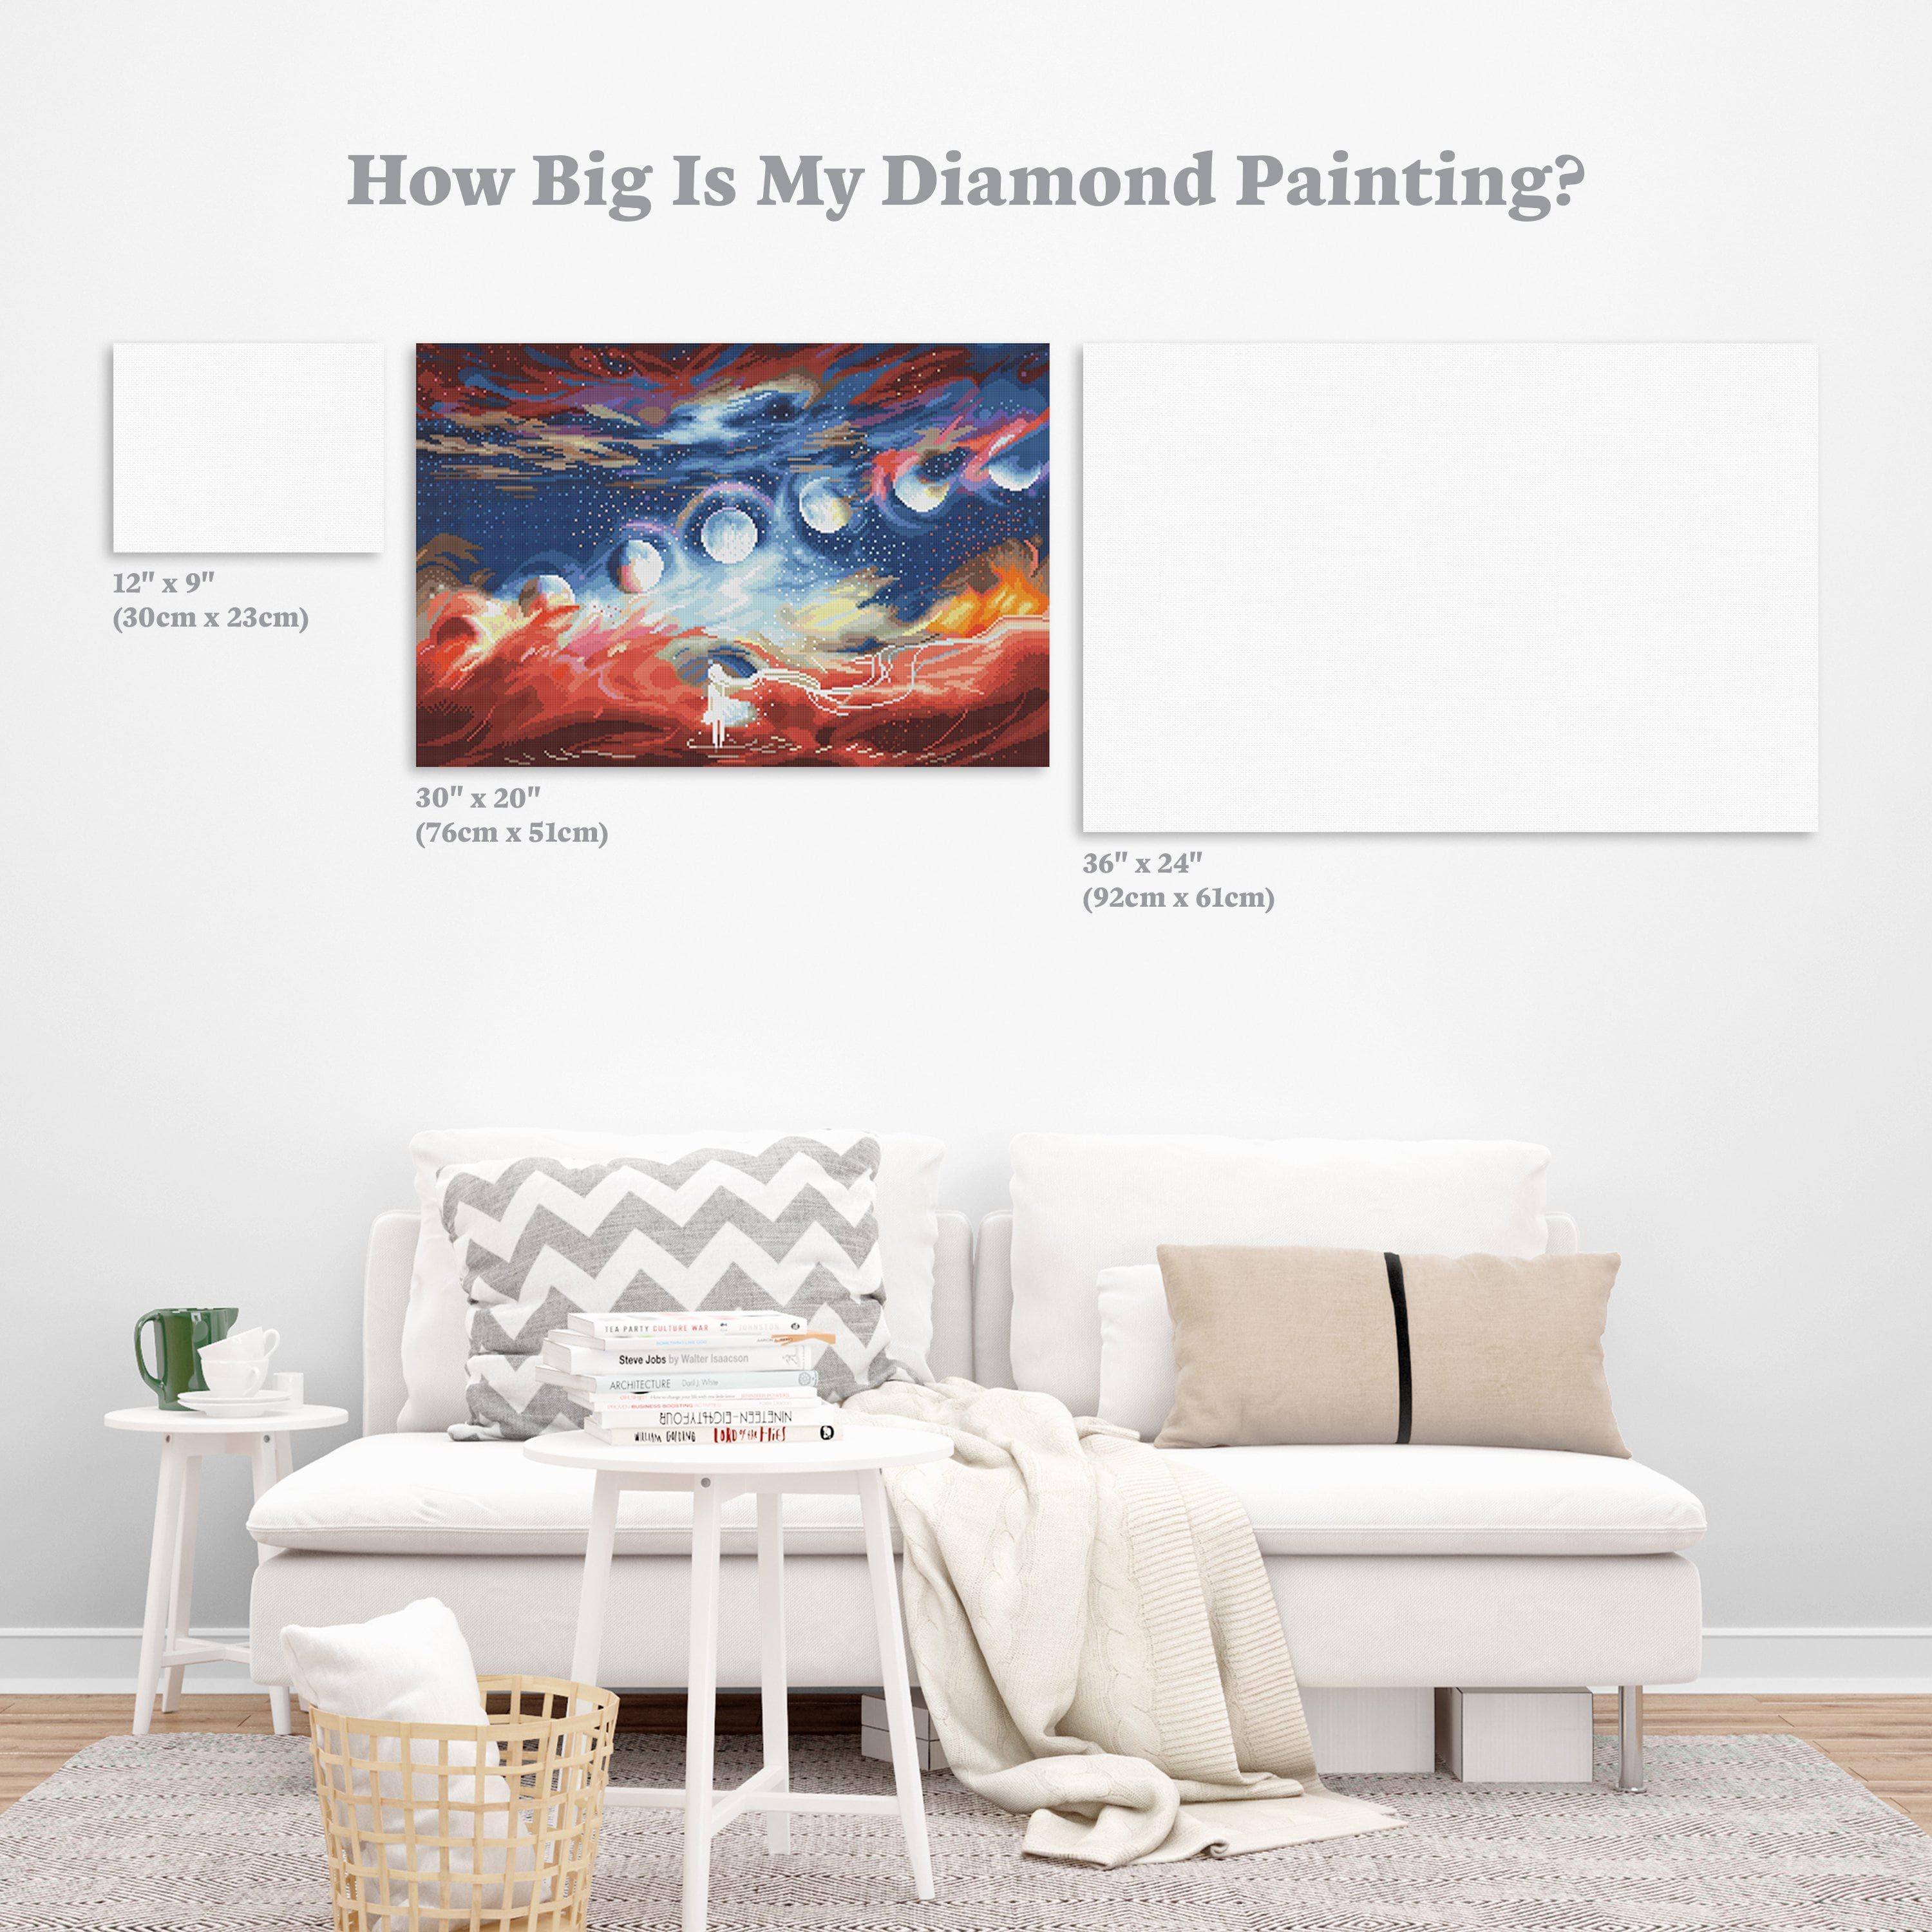 Mimik Night View Diamond Painting,Paint by Diamonds for Adults, Diamond Art  with Accessories & Tools,Wall Decoration Crafts,Relaxation and Home Wall